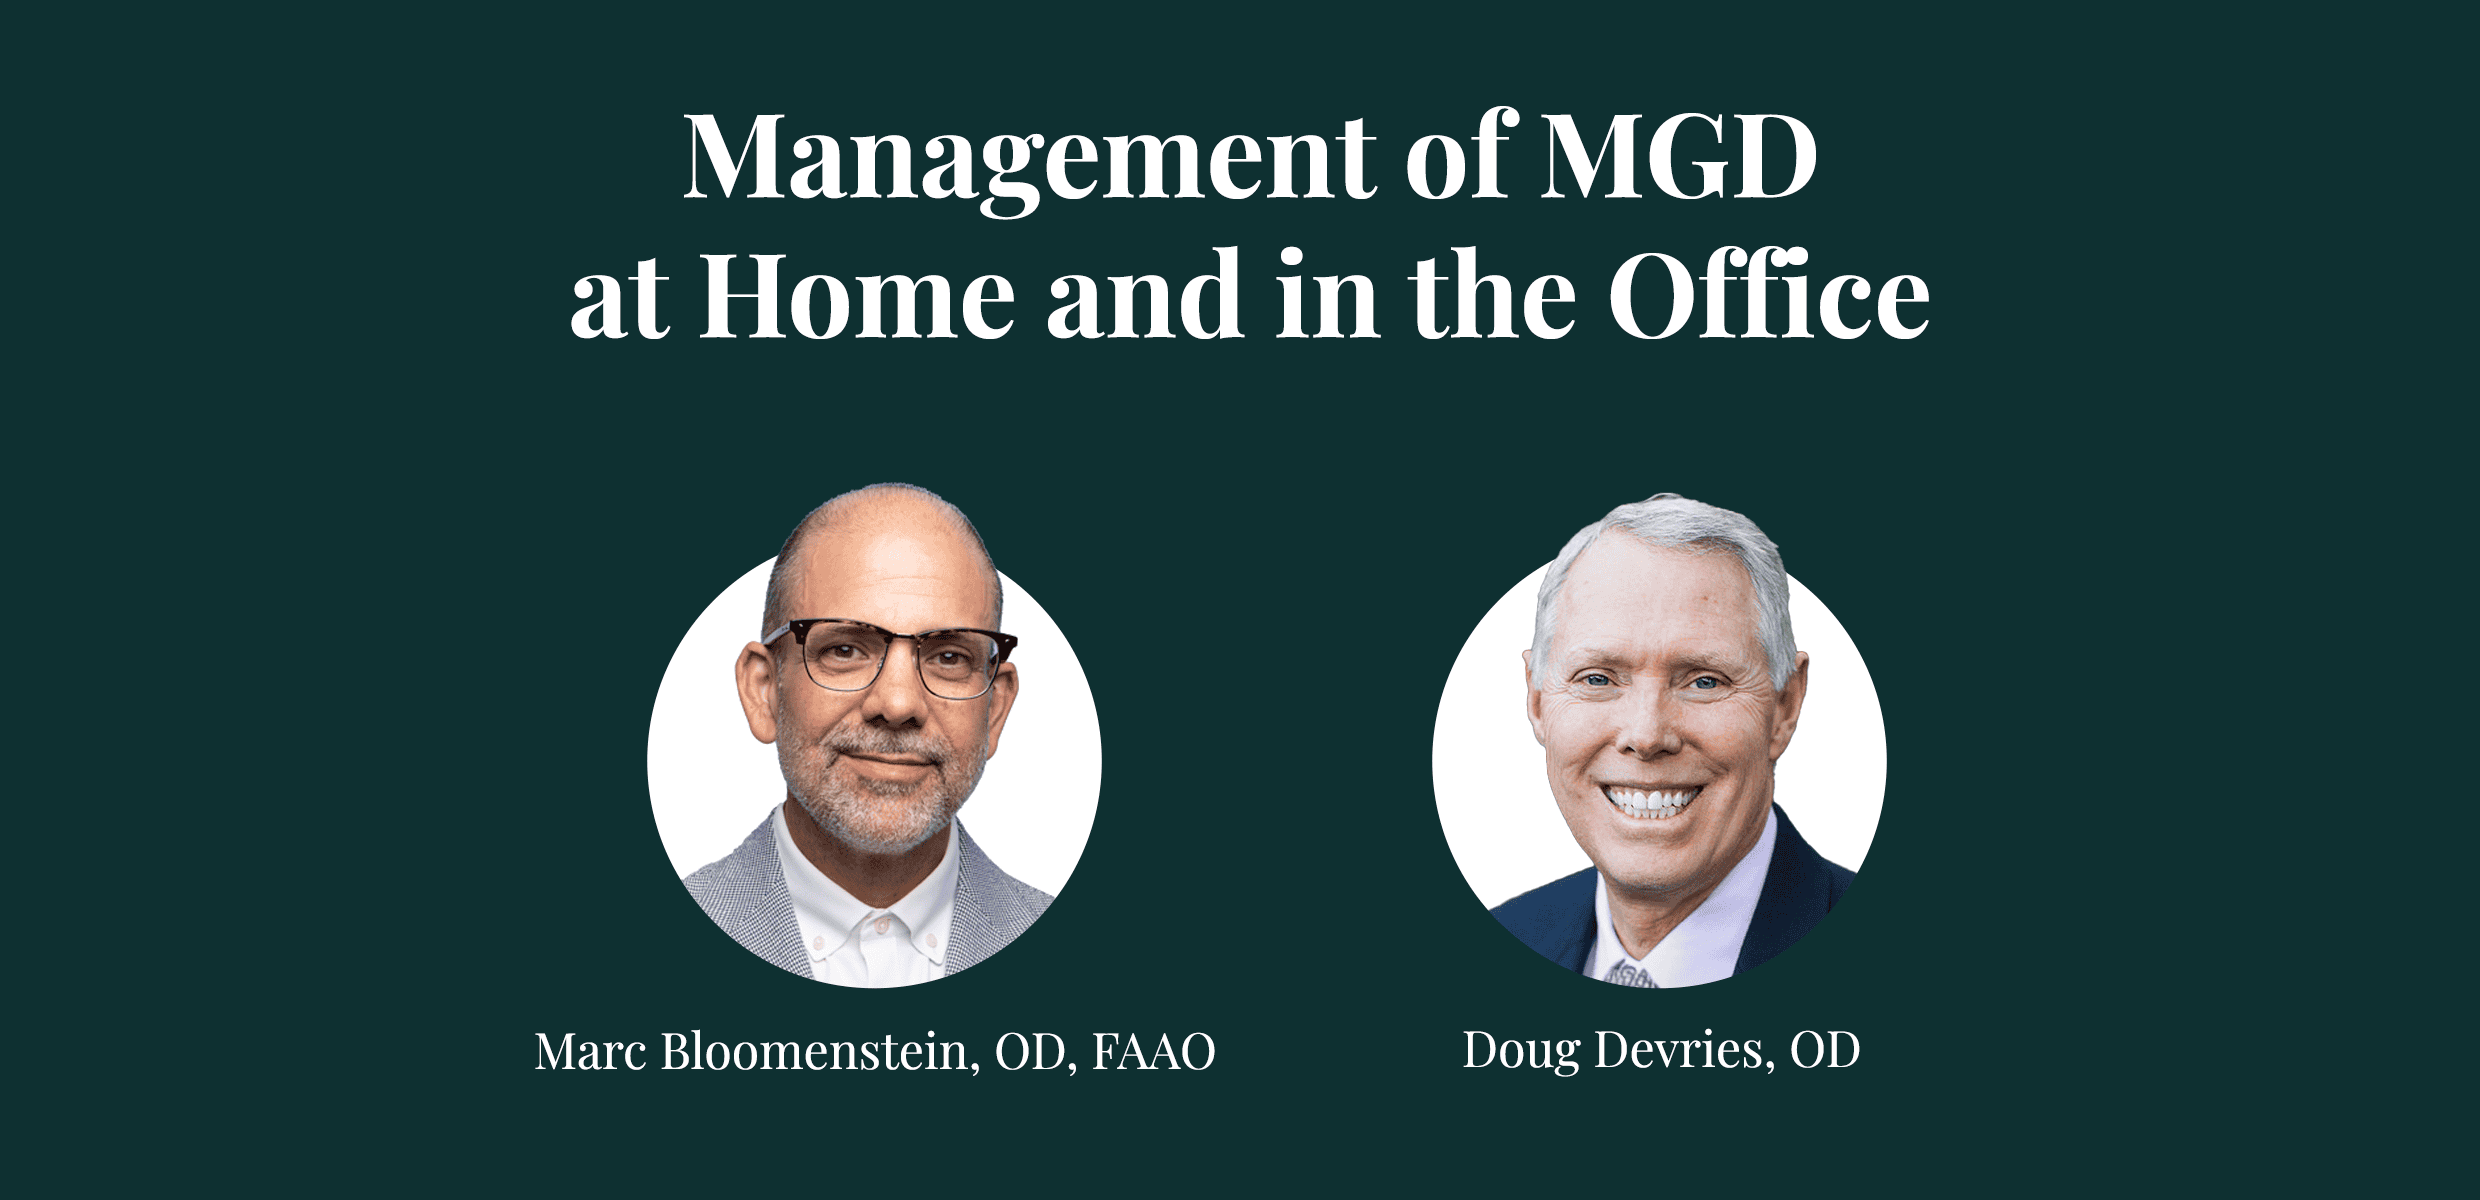 Management of MGD at Home and in the Office